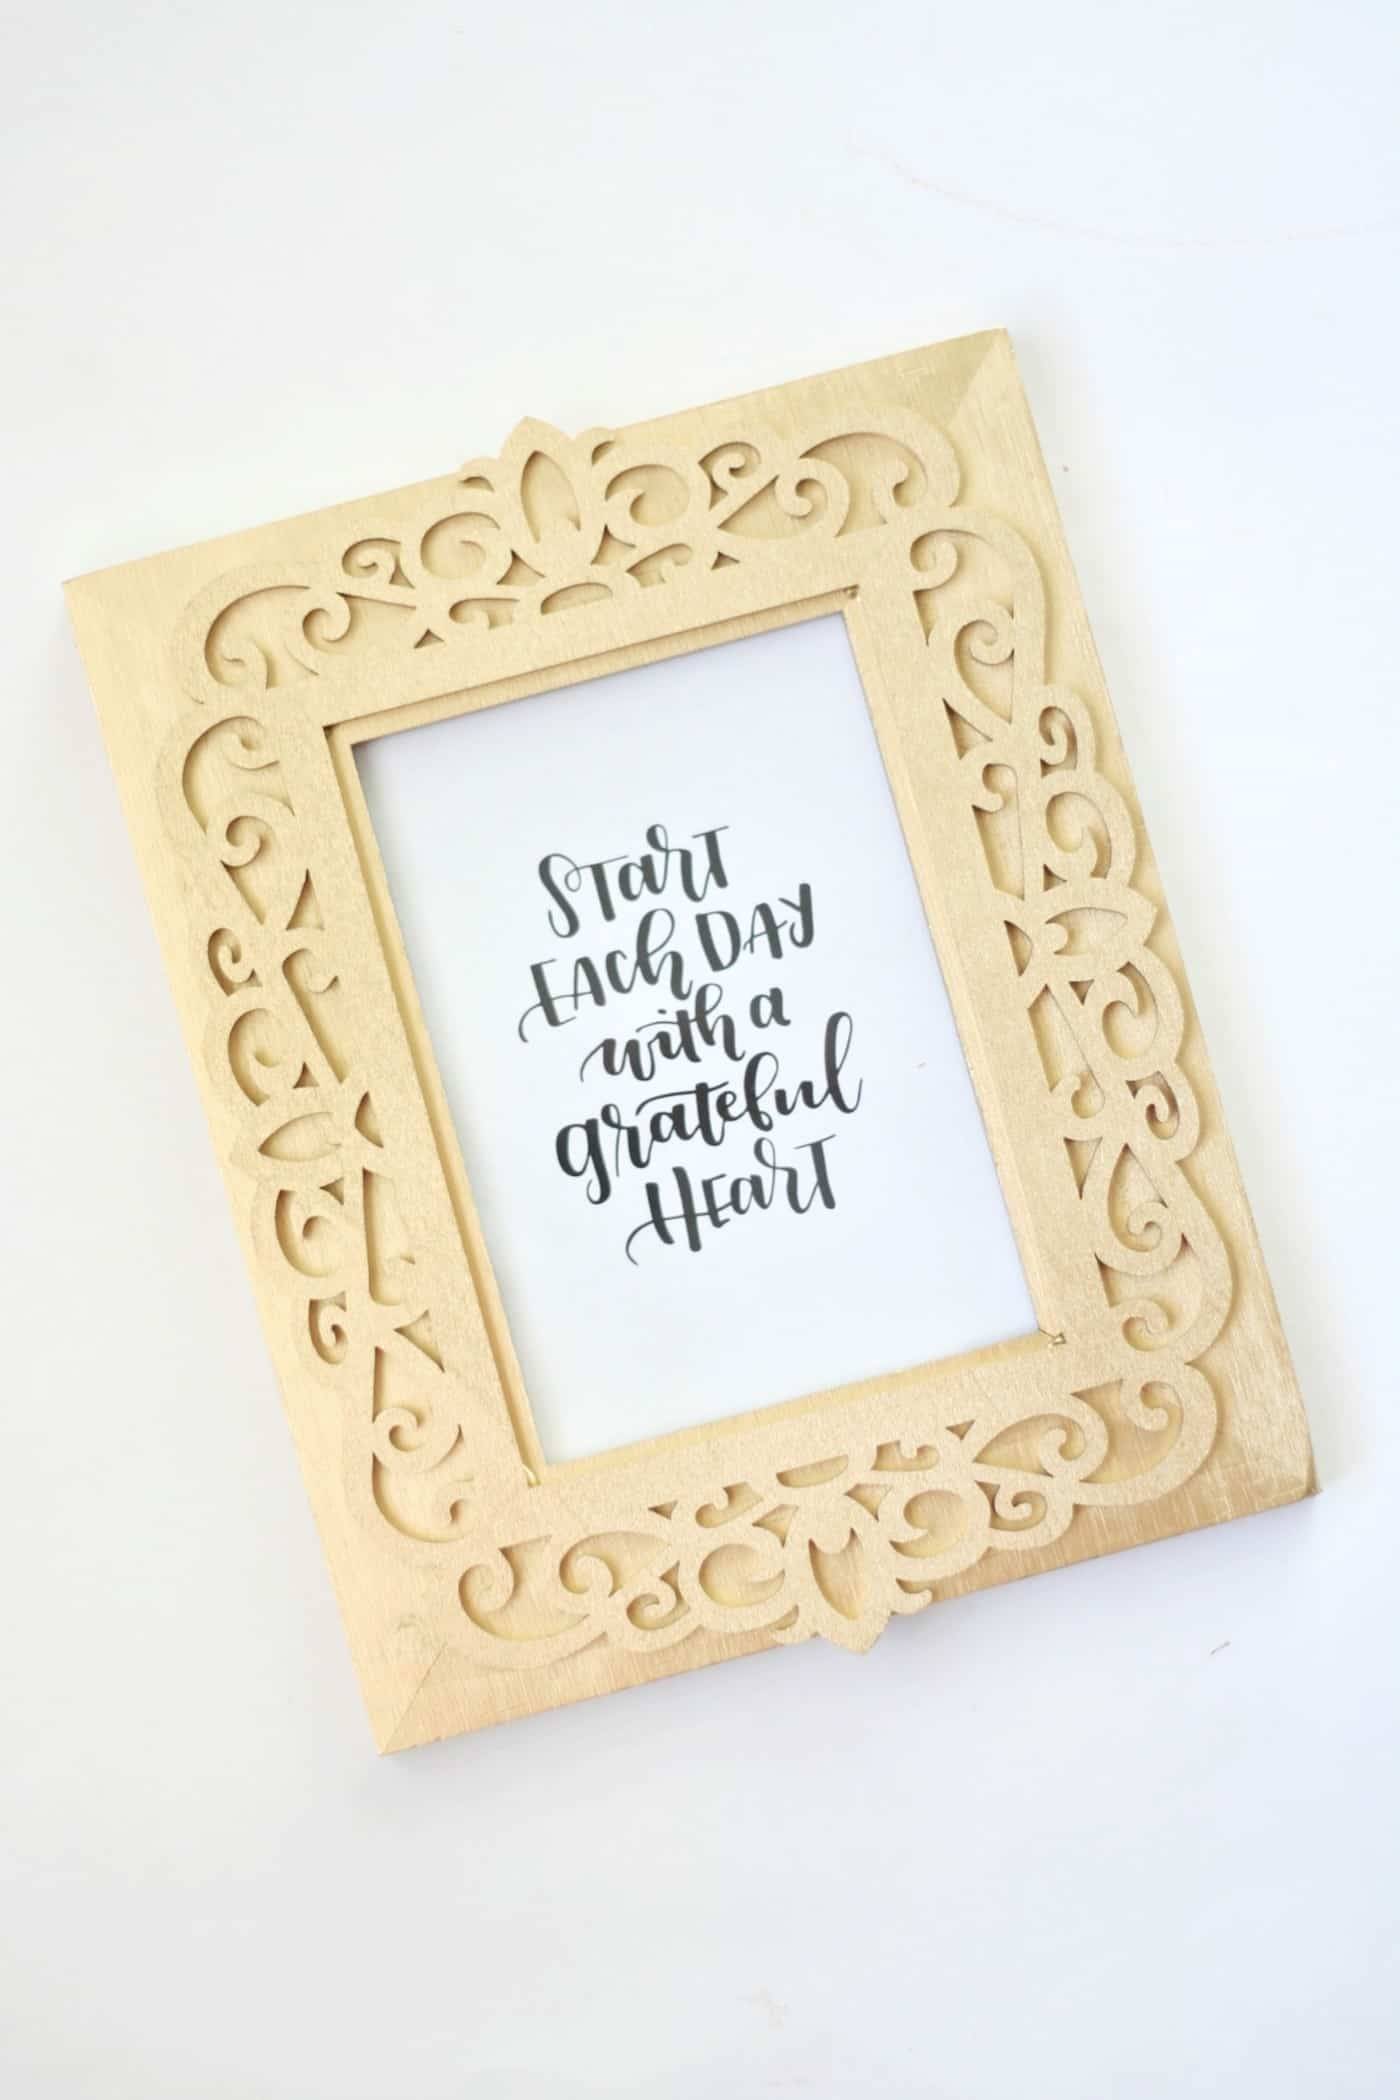 Picture frame makeover ideas - Photo via DIY Candy